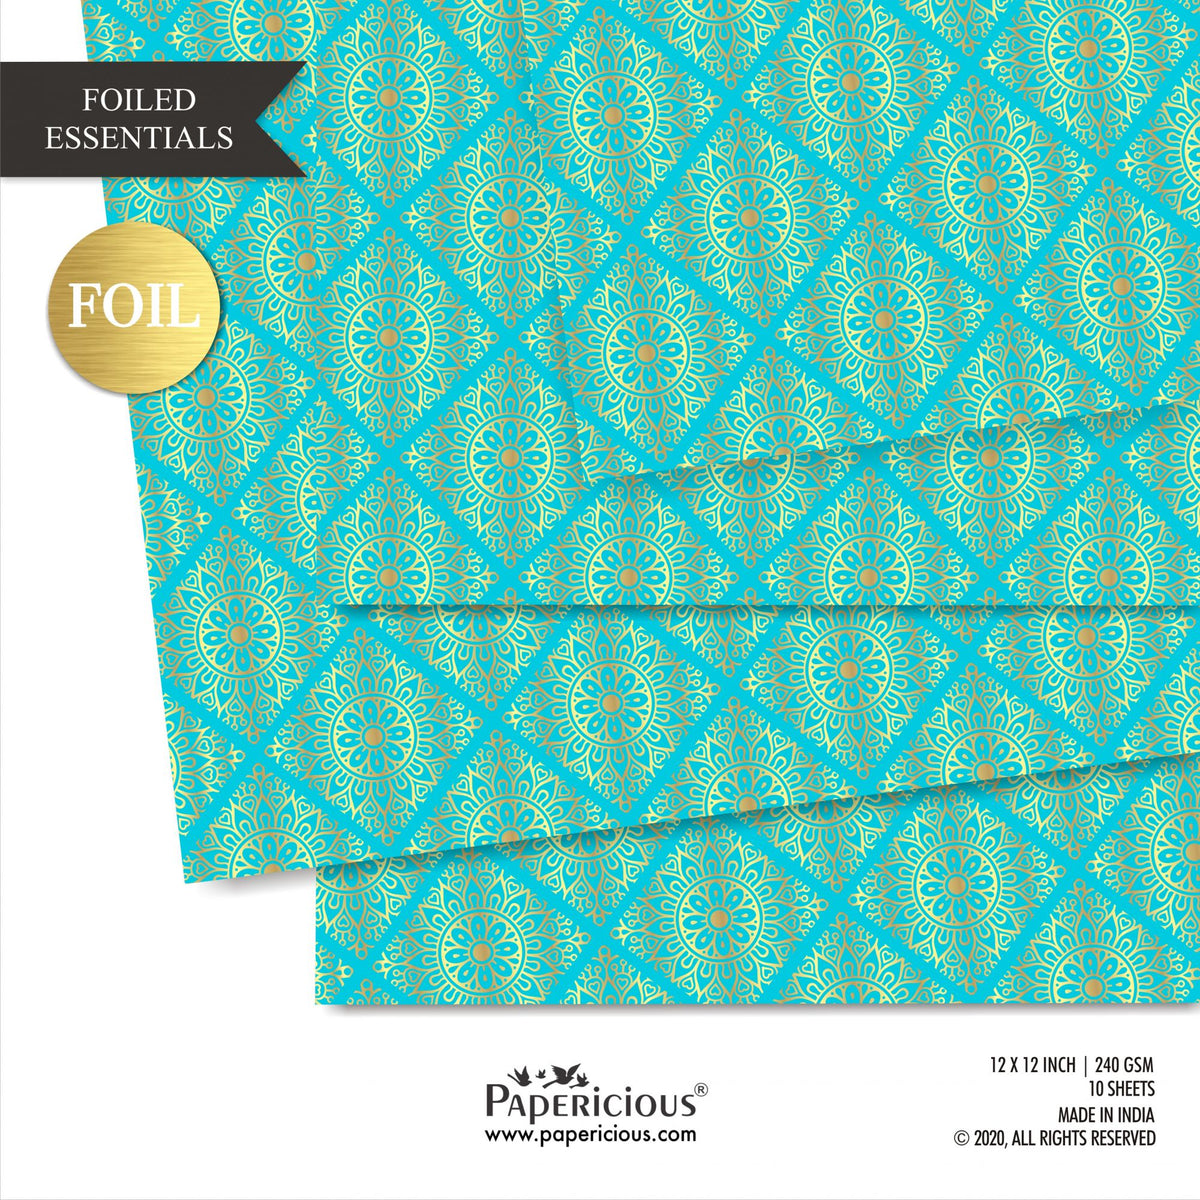 Papericious - Golden Foiled Pattern Scrapbook Papers 12x12 inch / 10 sheets / #12513